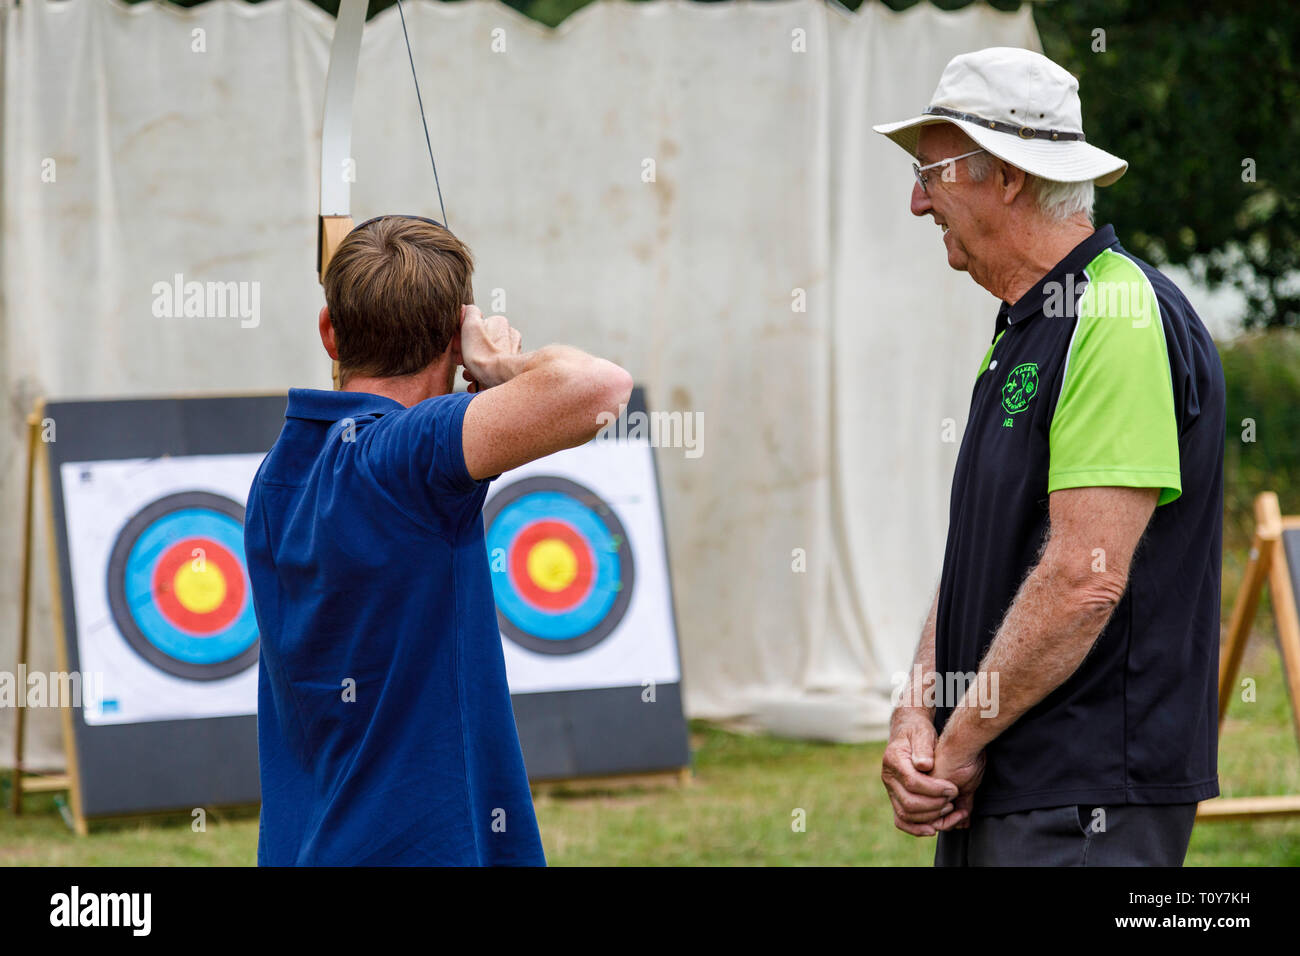 An archery experience at the 2018 Aylsham Agricultural Show, Norfolk, UK. Stock Photo